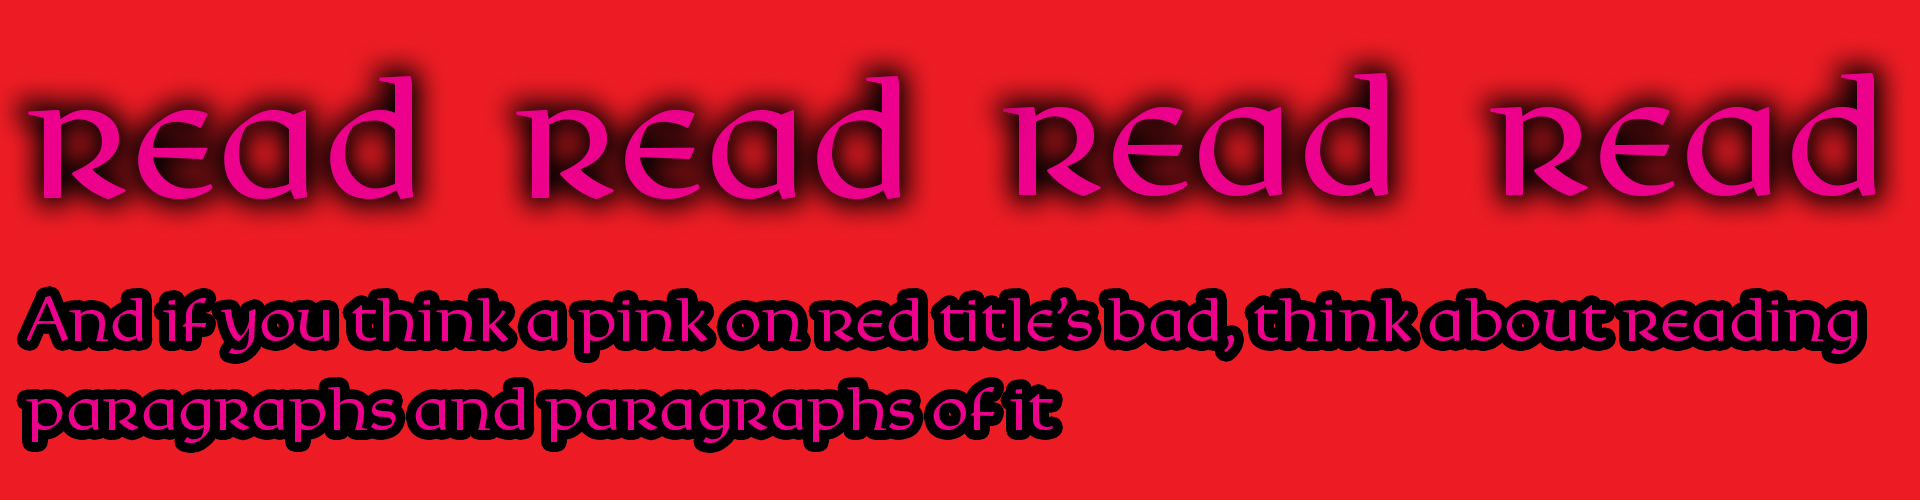 pink_on_red_2.png